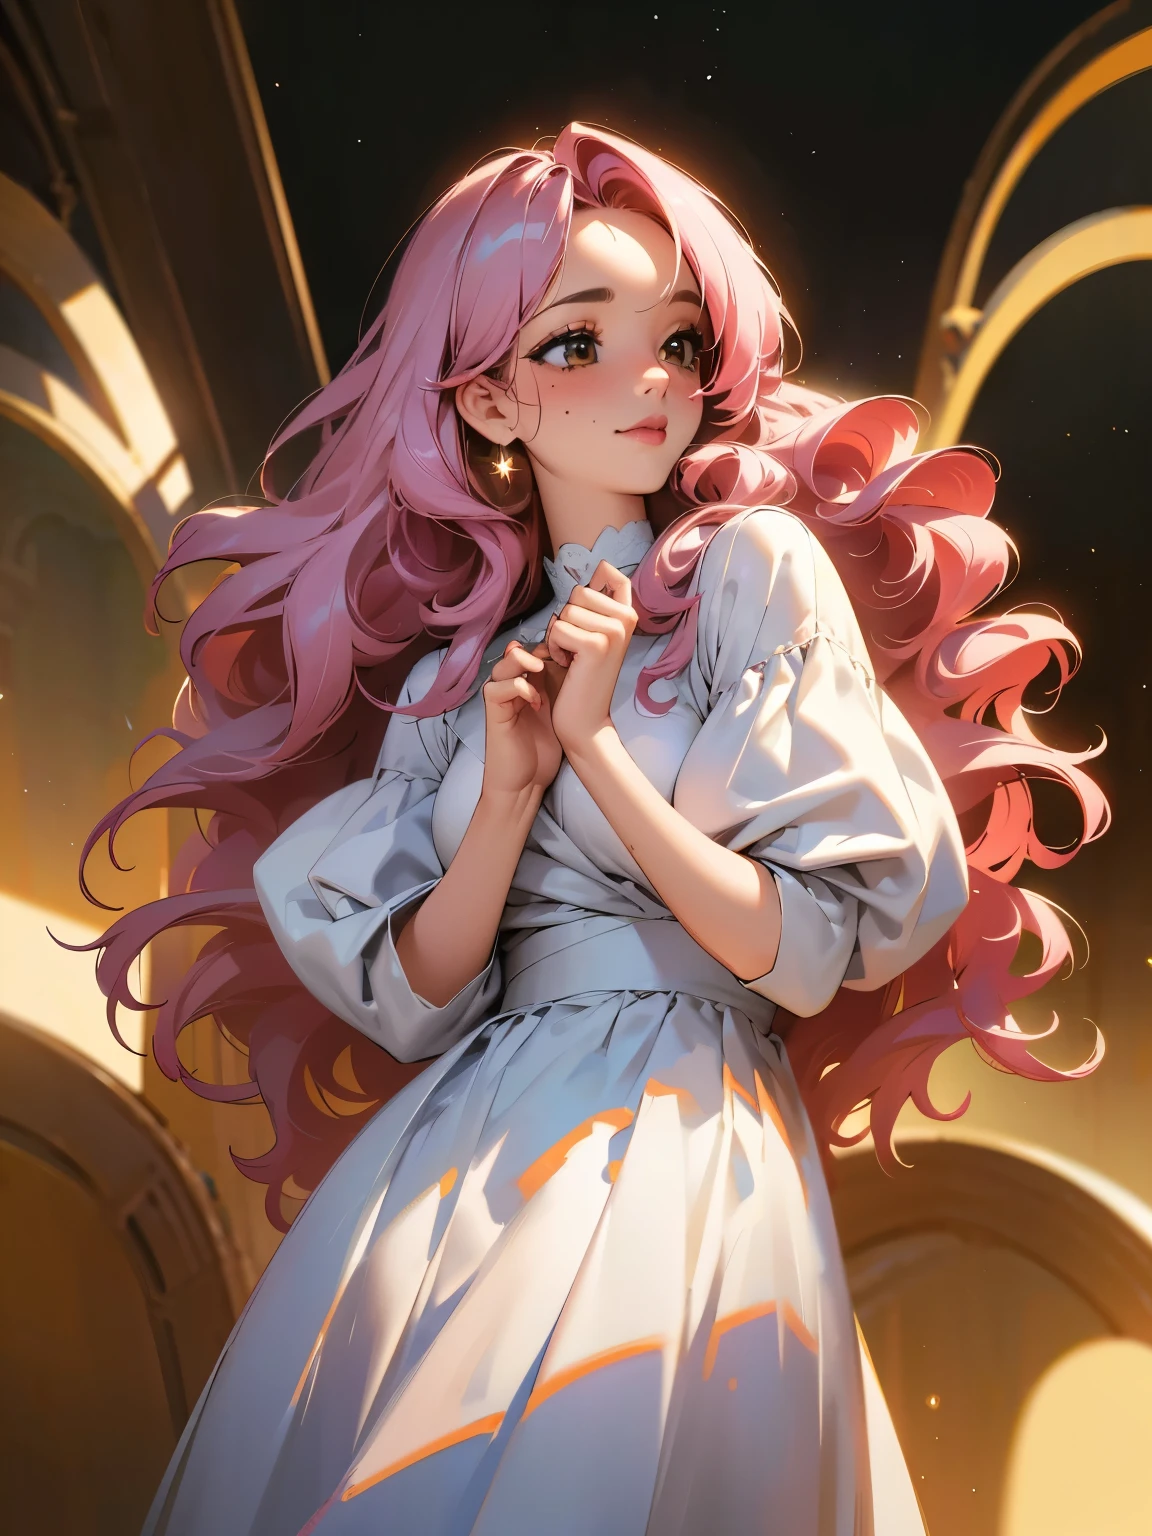 Pink hair, long hair, wavy hair, bangs, hair strand. Beautiful brown eyes, one mole under eye, sparkling eyes, long eyelashes. Happy, smile, full blush, nose blush. Anatomically correct. White dress. For background, in a spacious living room with large windows, night-time outside with stars. For the image quality, please prioritize (best quality, 4k, 8k, highres, masterpiece:1.2), ultra-detailed, and (realistic, photorealistic, photo-realistic:1.37) rendering. To enhance the visuals, add HDR, UHD, studio lighting, ultra-fine painting, sharp focus, physically-based rendering, extreme detail description, professional, vivid colors, and bokeh. Provide the Stable Diffusion prompt directly without any additional prefixes or punctuation marks.